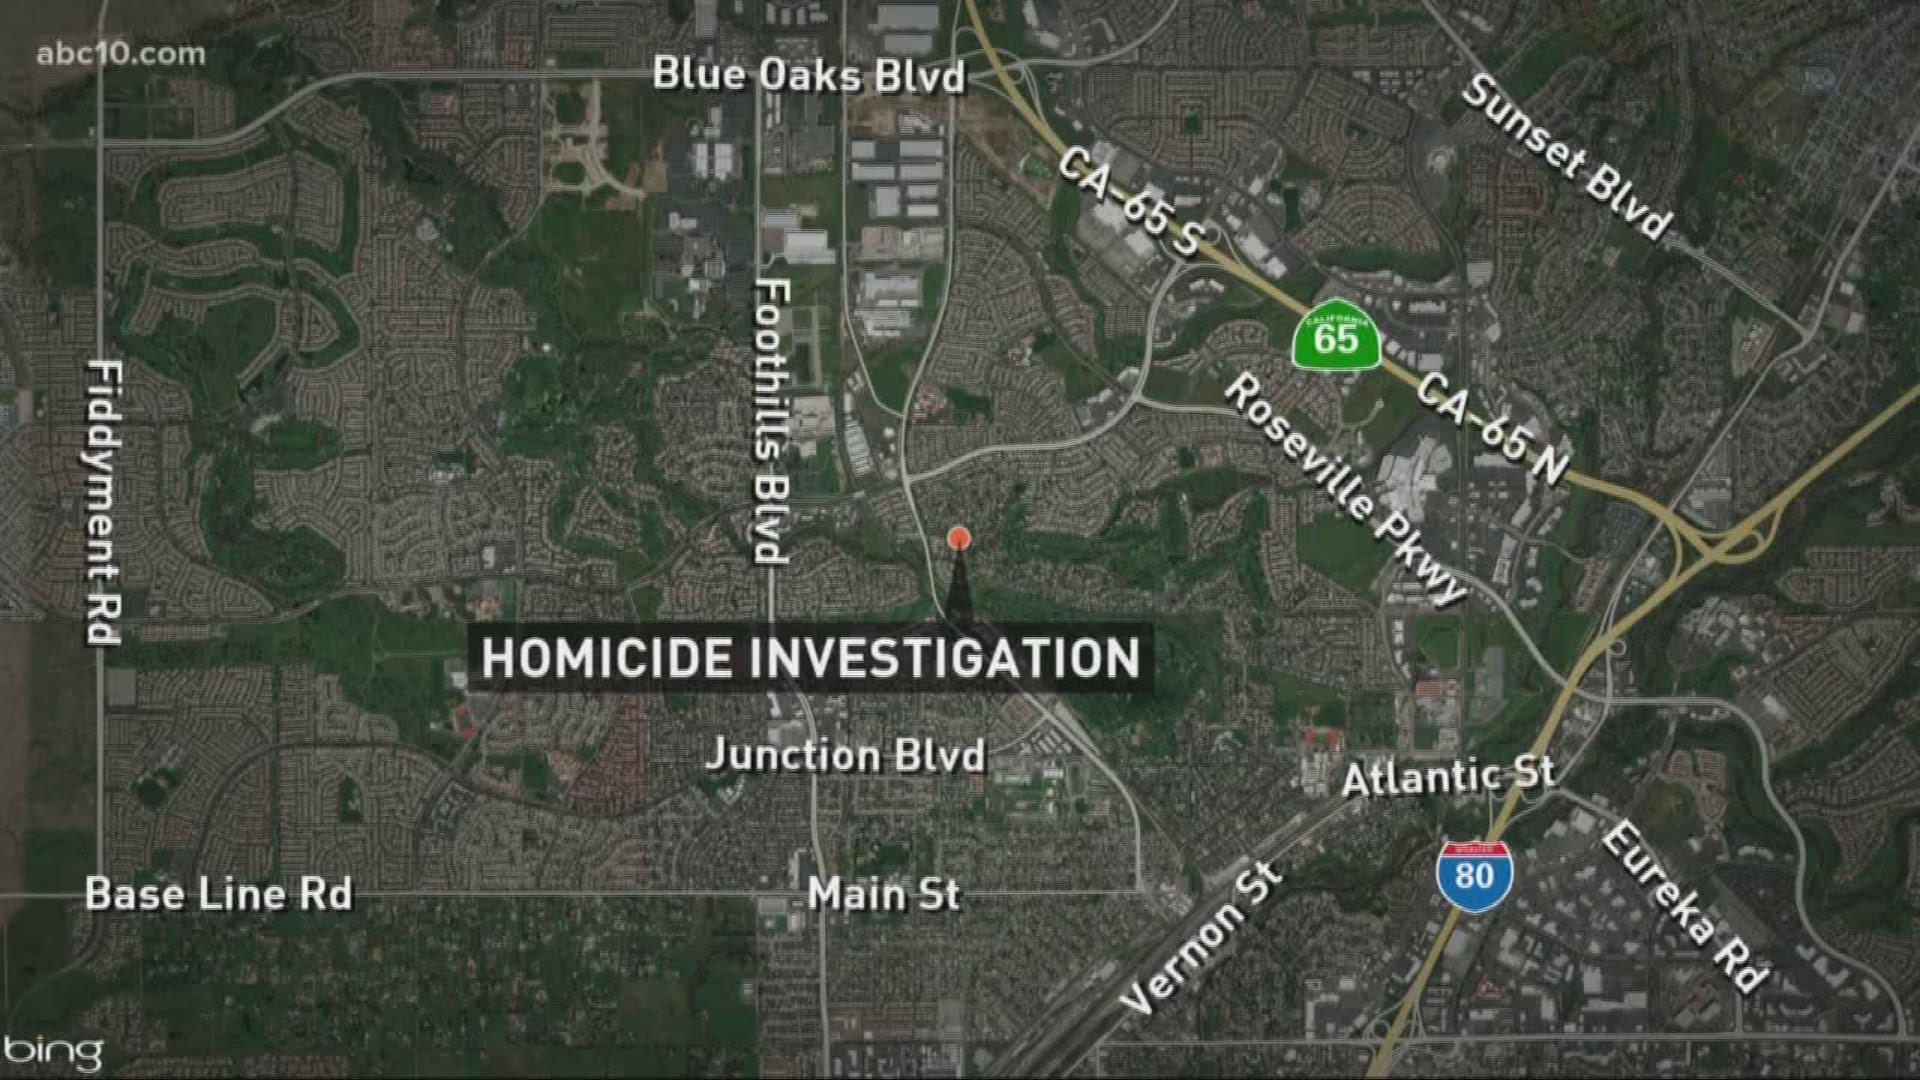 They currently have one suspect in custody, a 42-year-old Roseville man. Police are investigating whether or not the suspect killed his 72-year-old father.